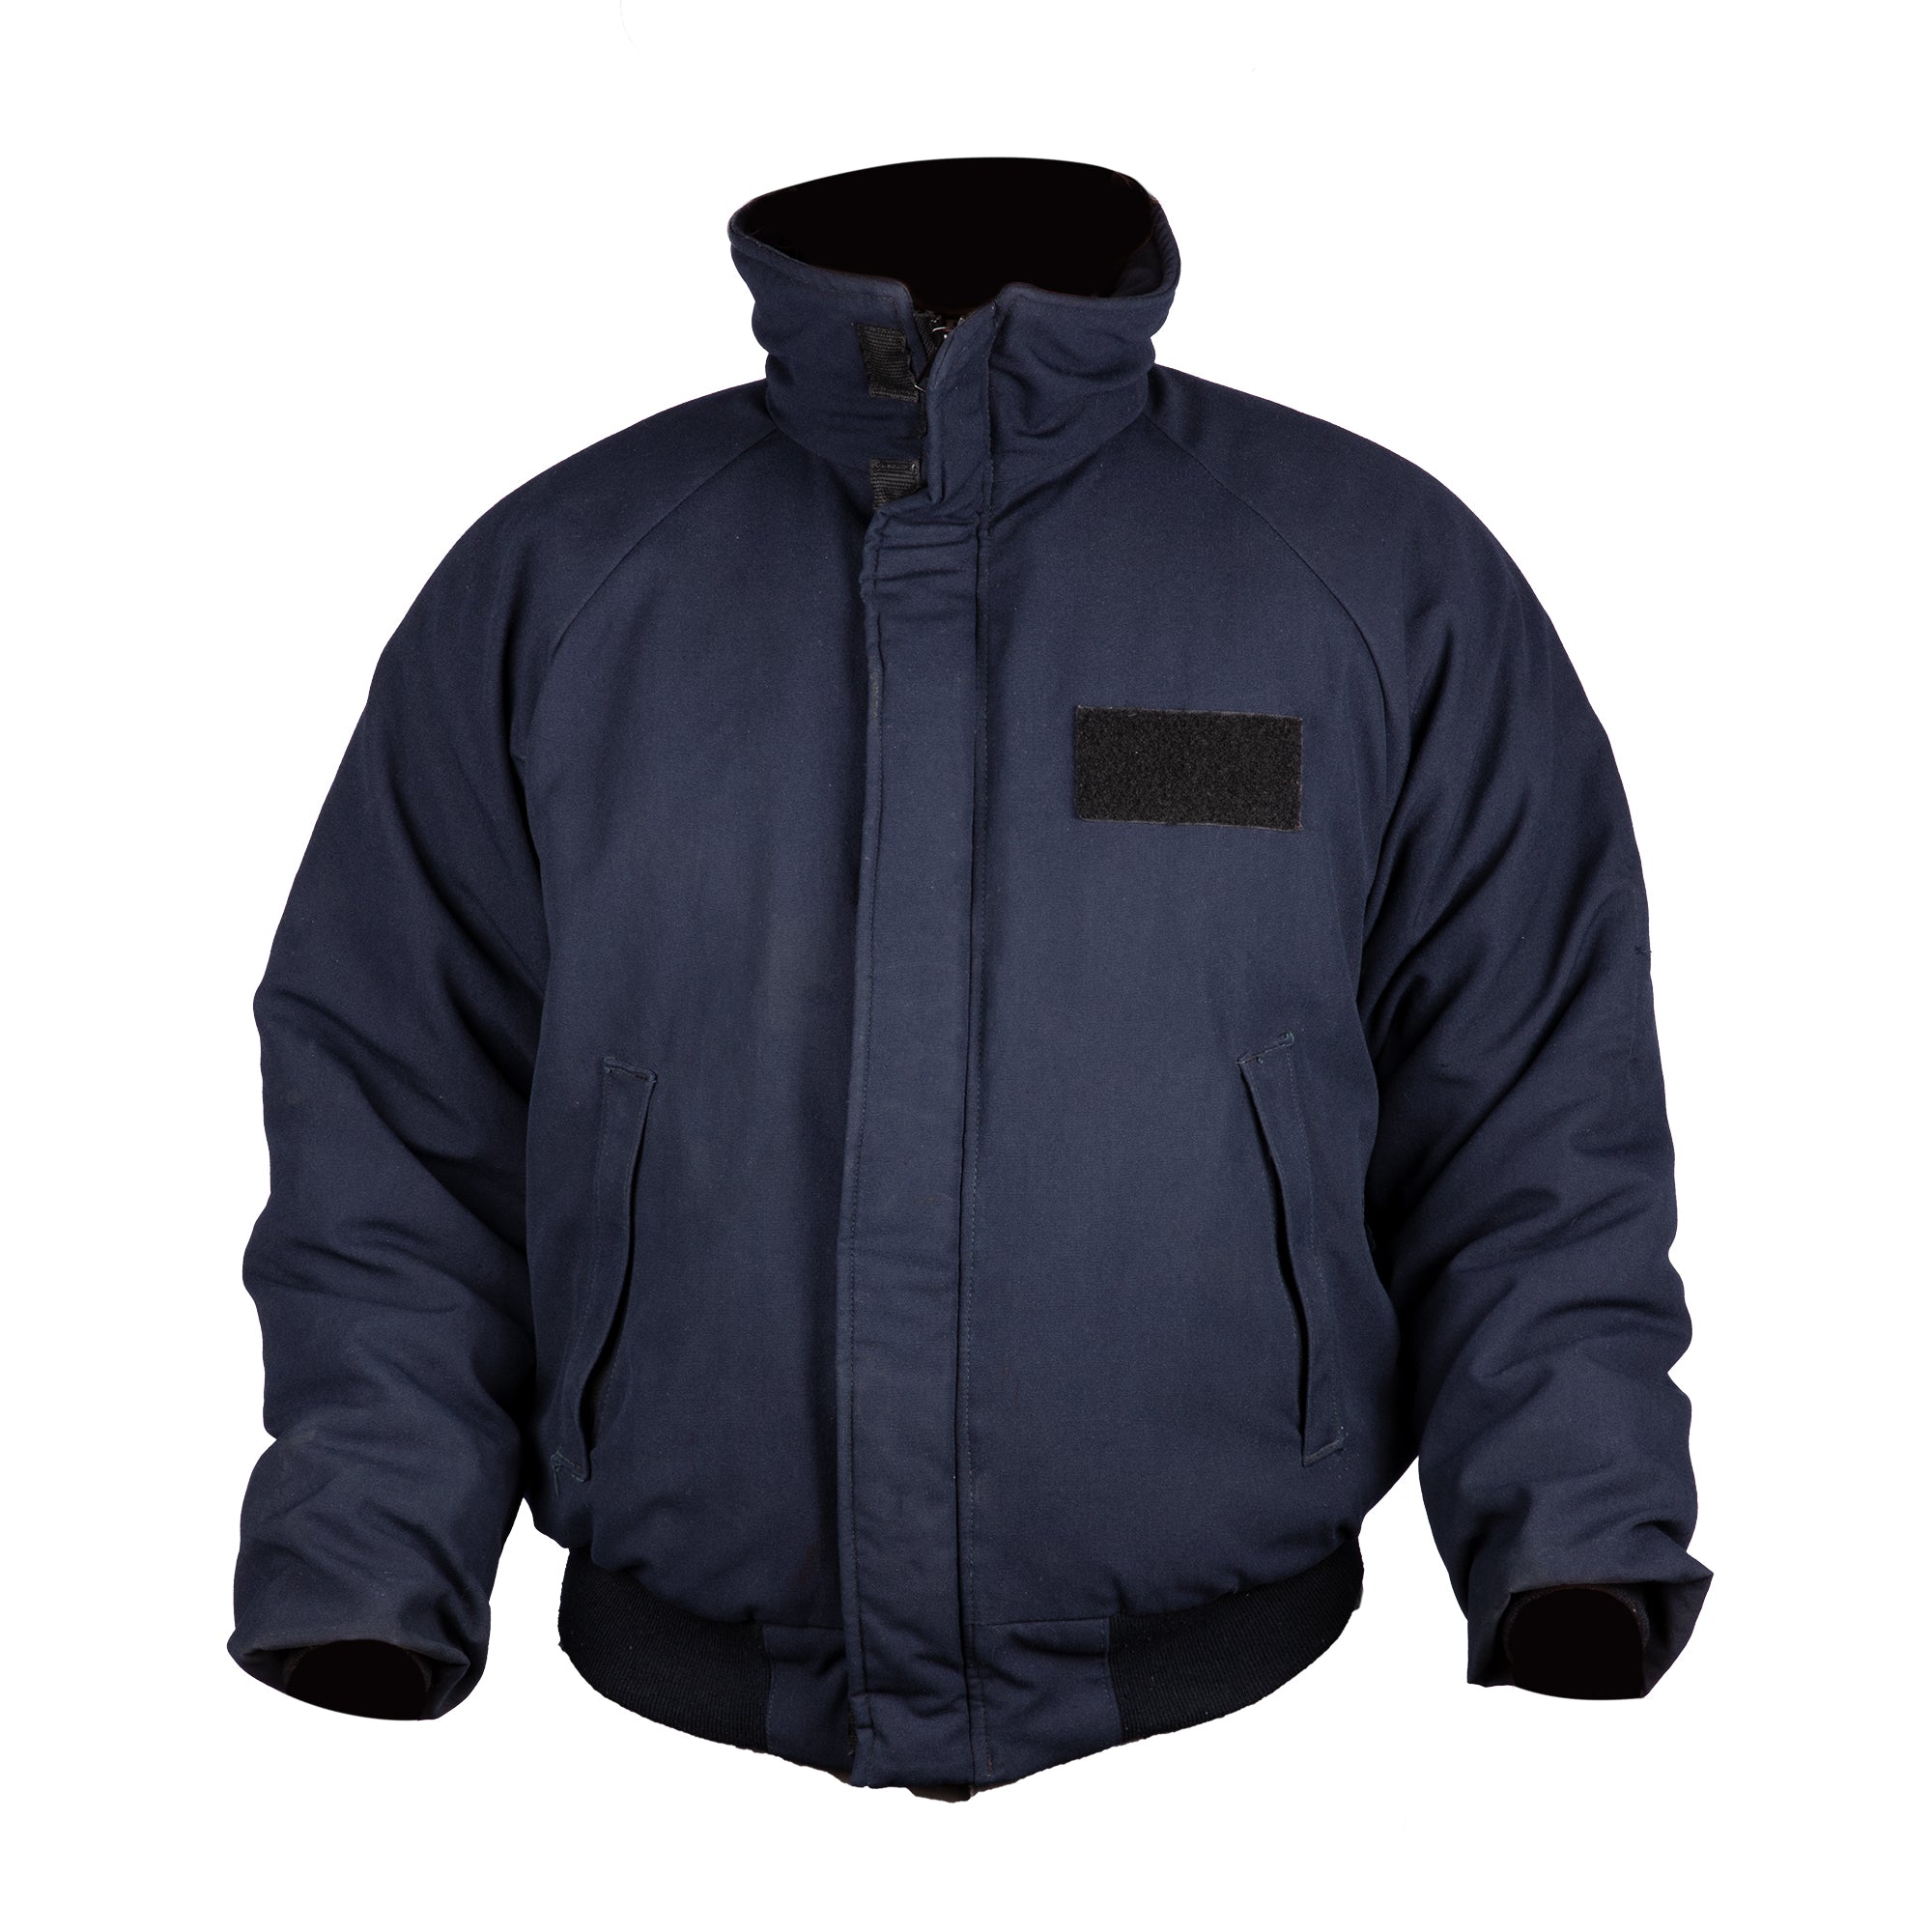 NAVY Shipboard Cold Weather Jacket